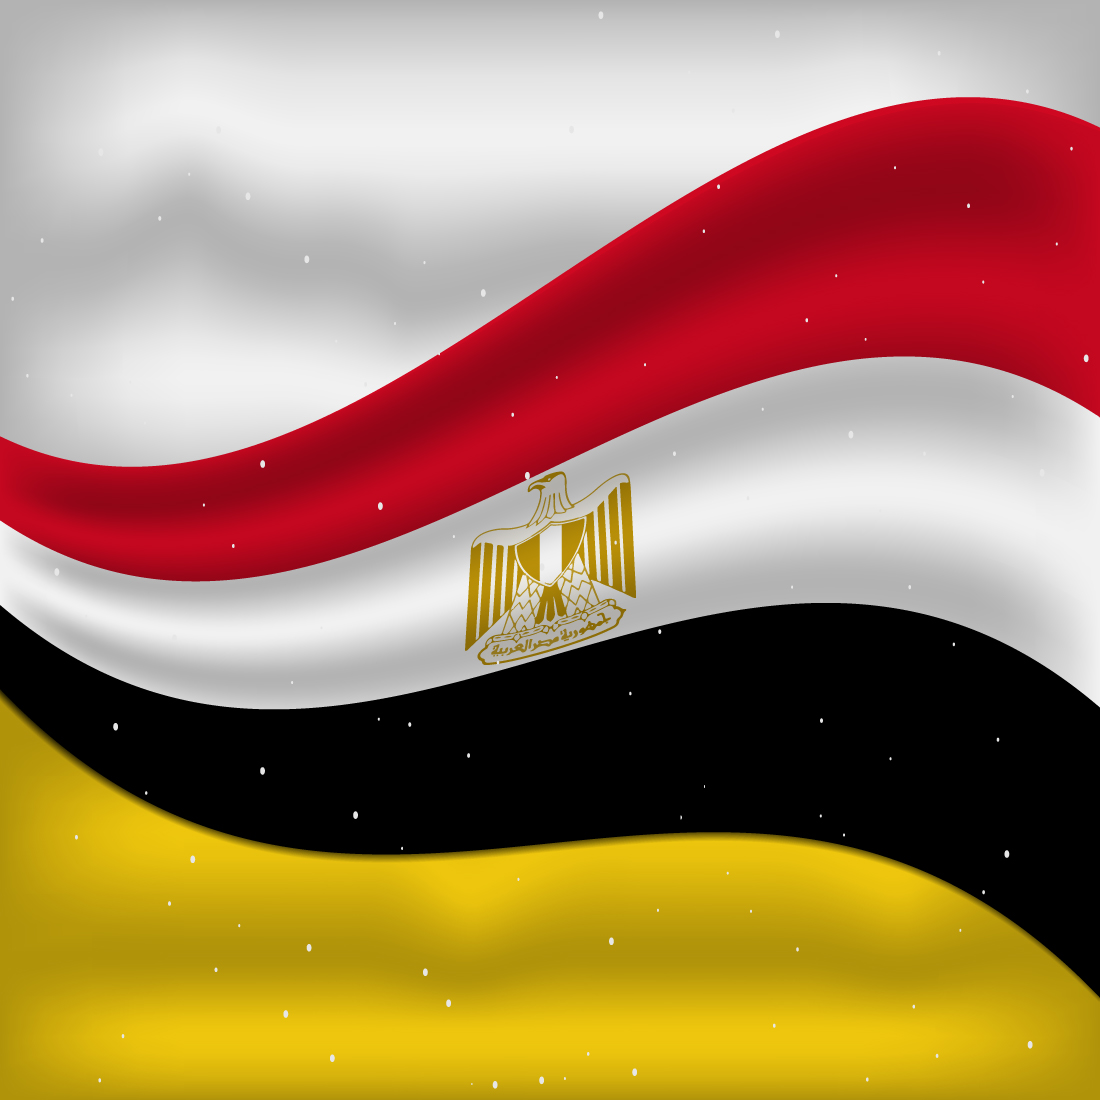 Irresistible image of the flag of Egypt.